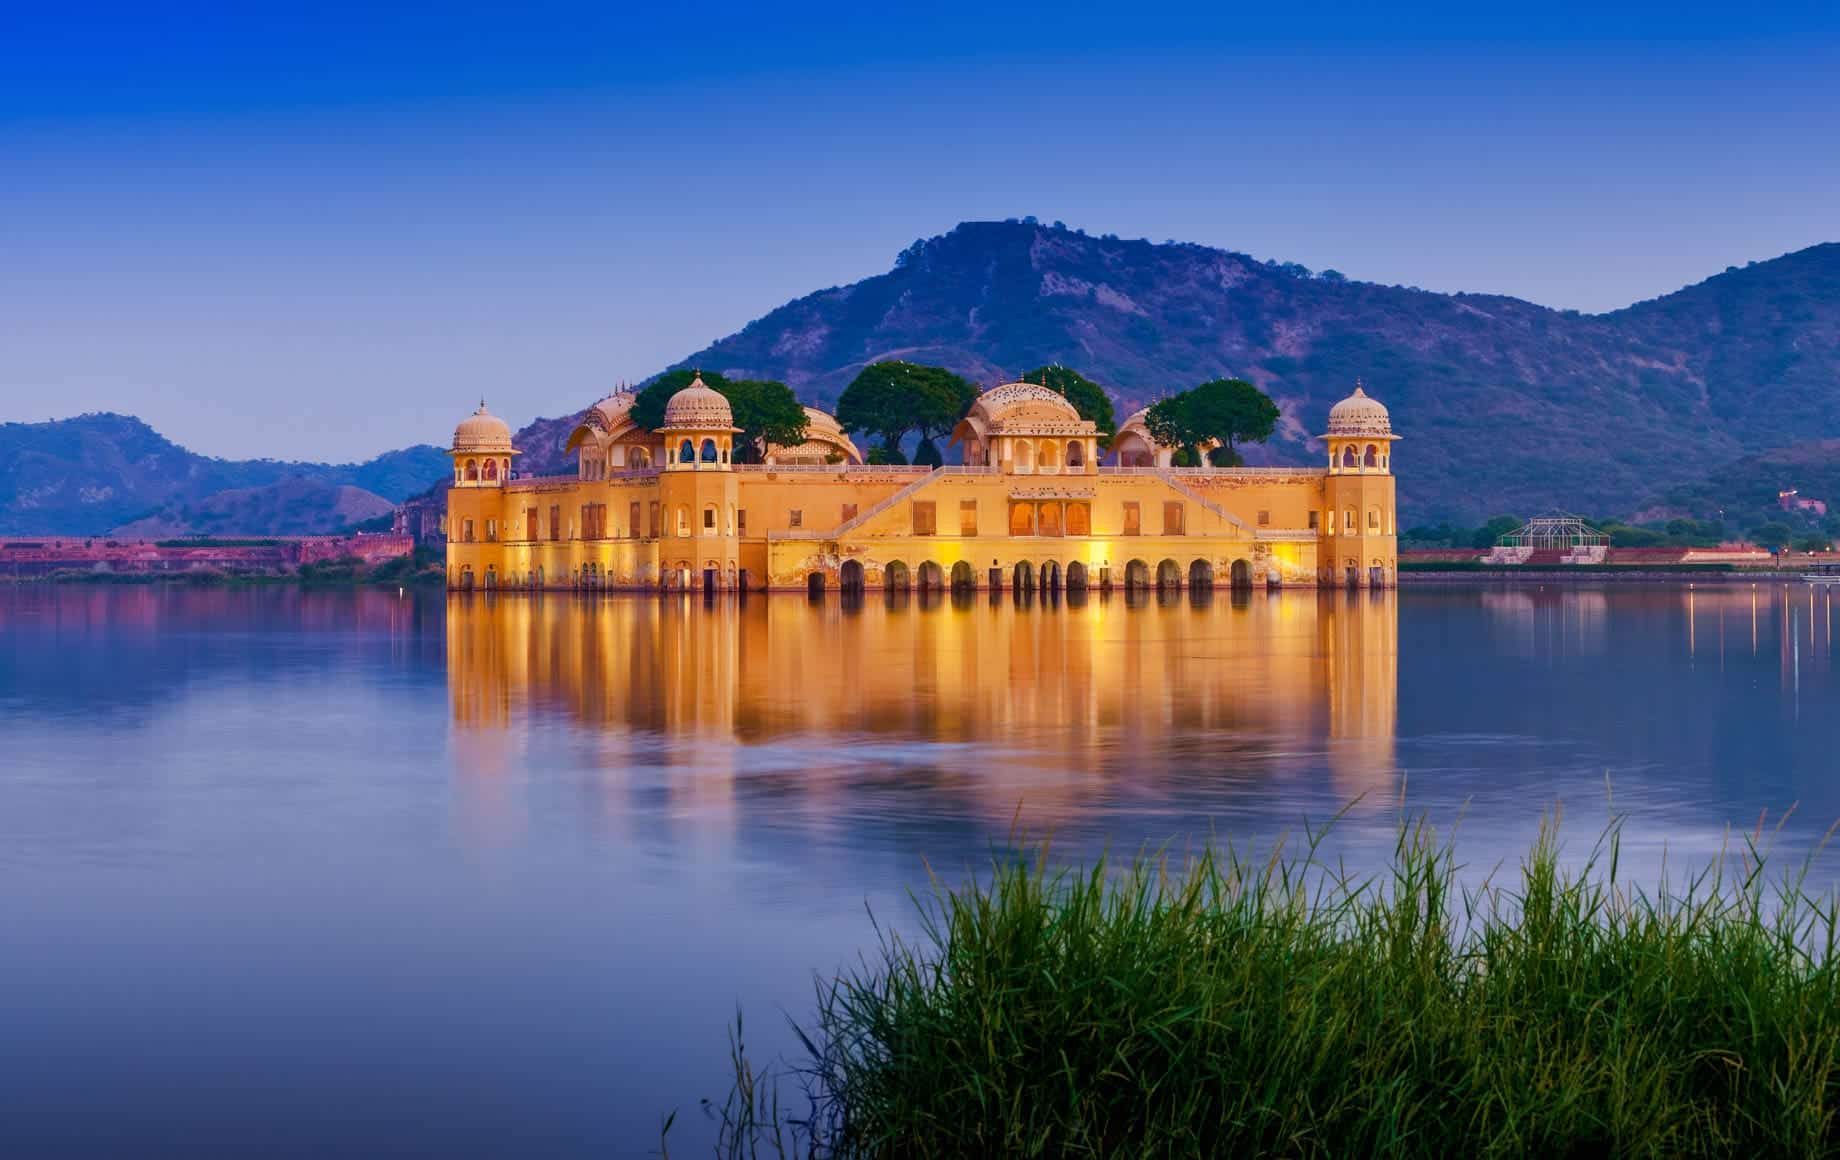 Jaipur Palace in the middle of a lake